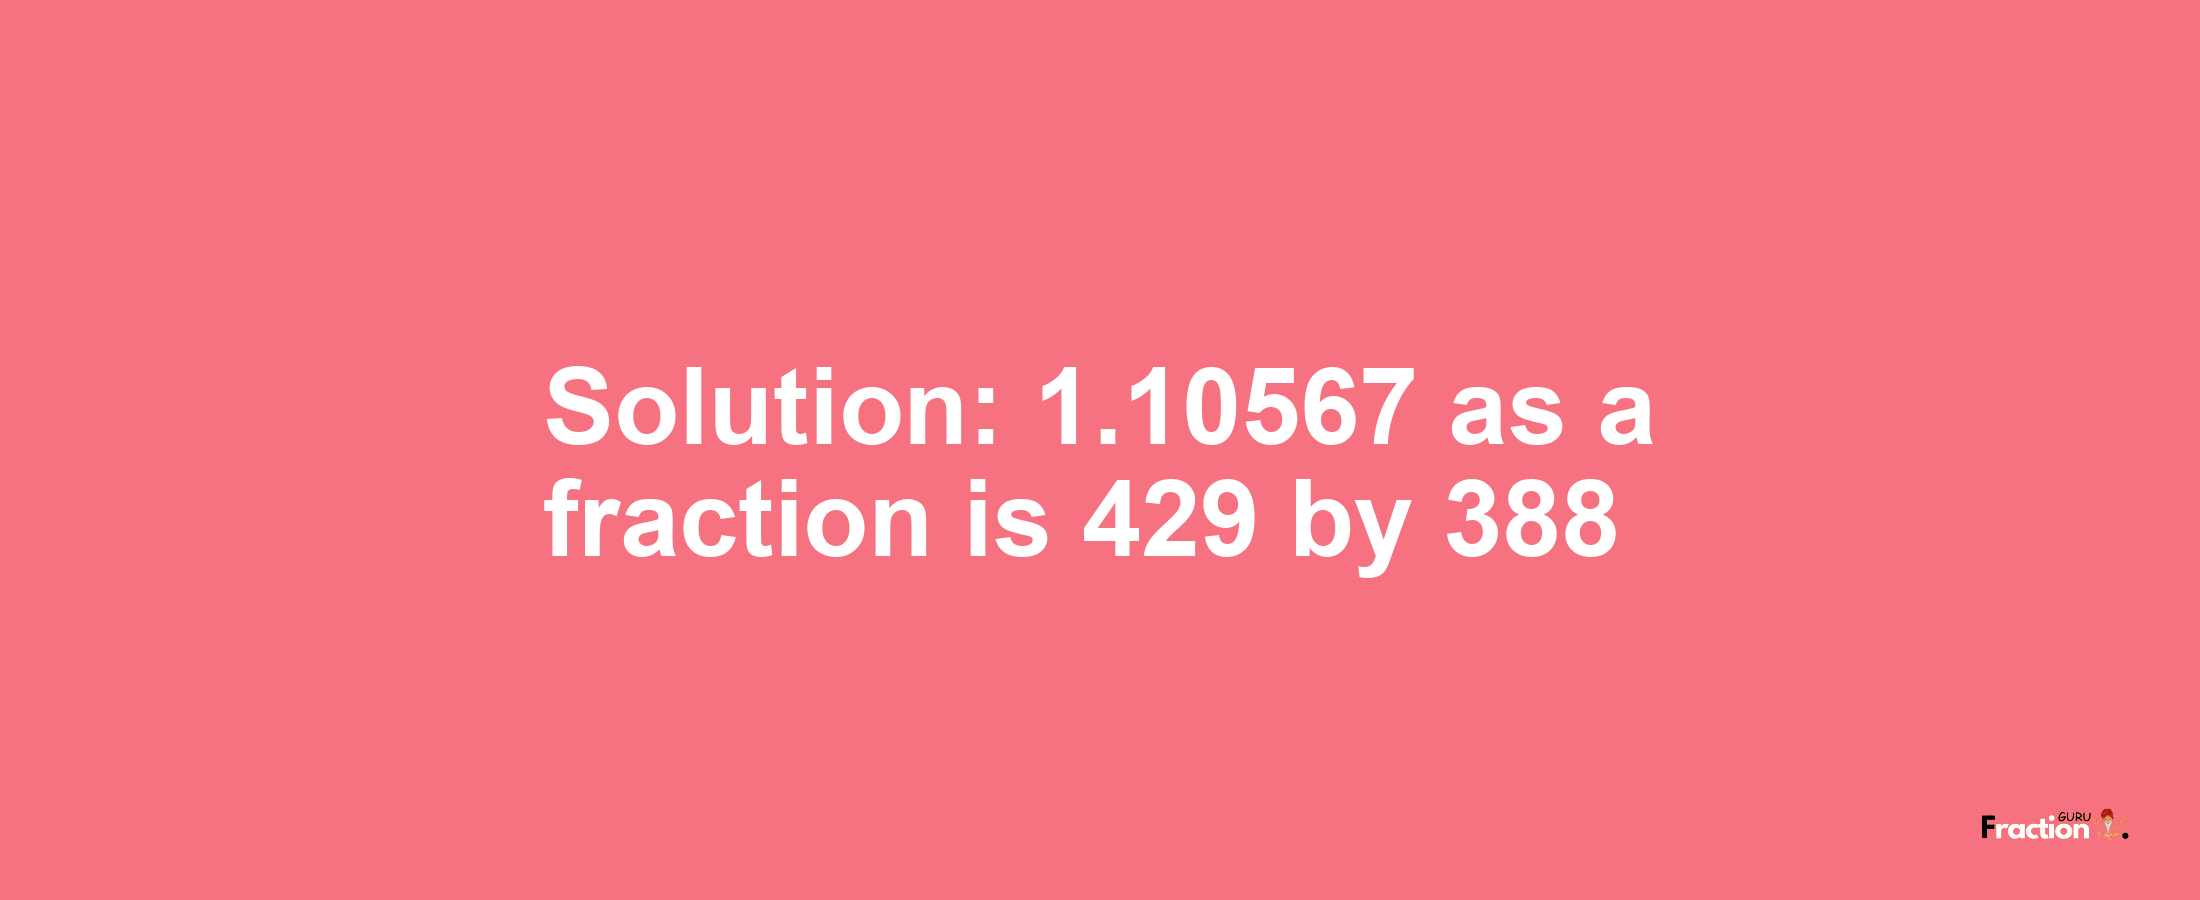 Solution:1.10567 as a fraction is 429/388